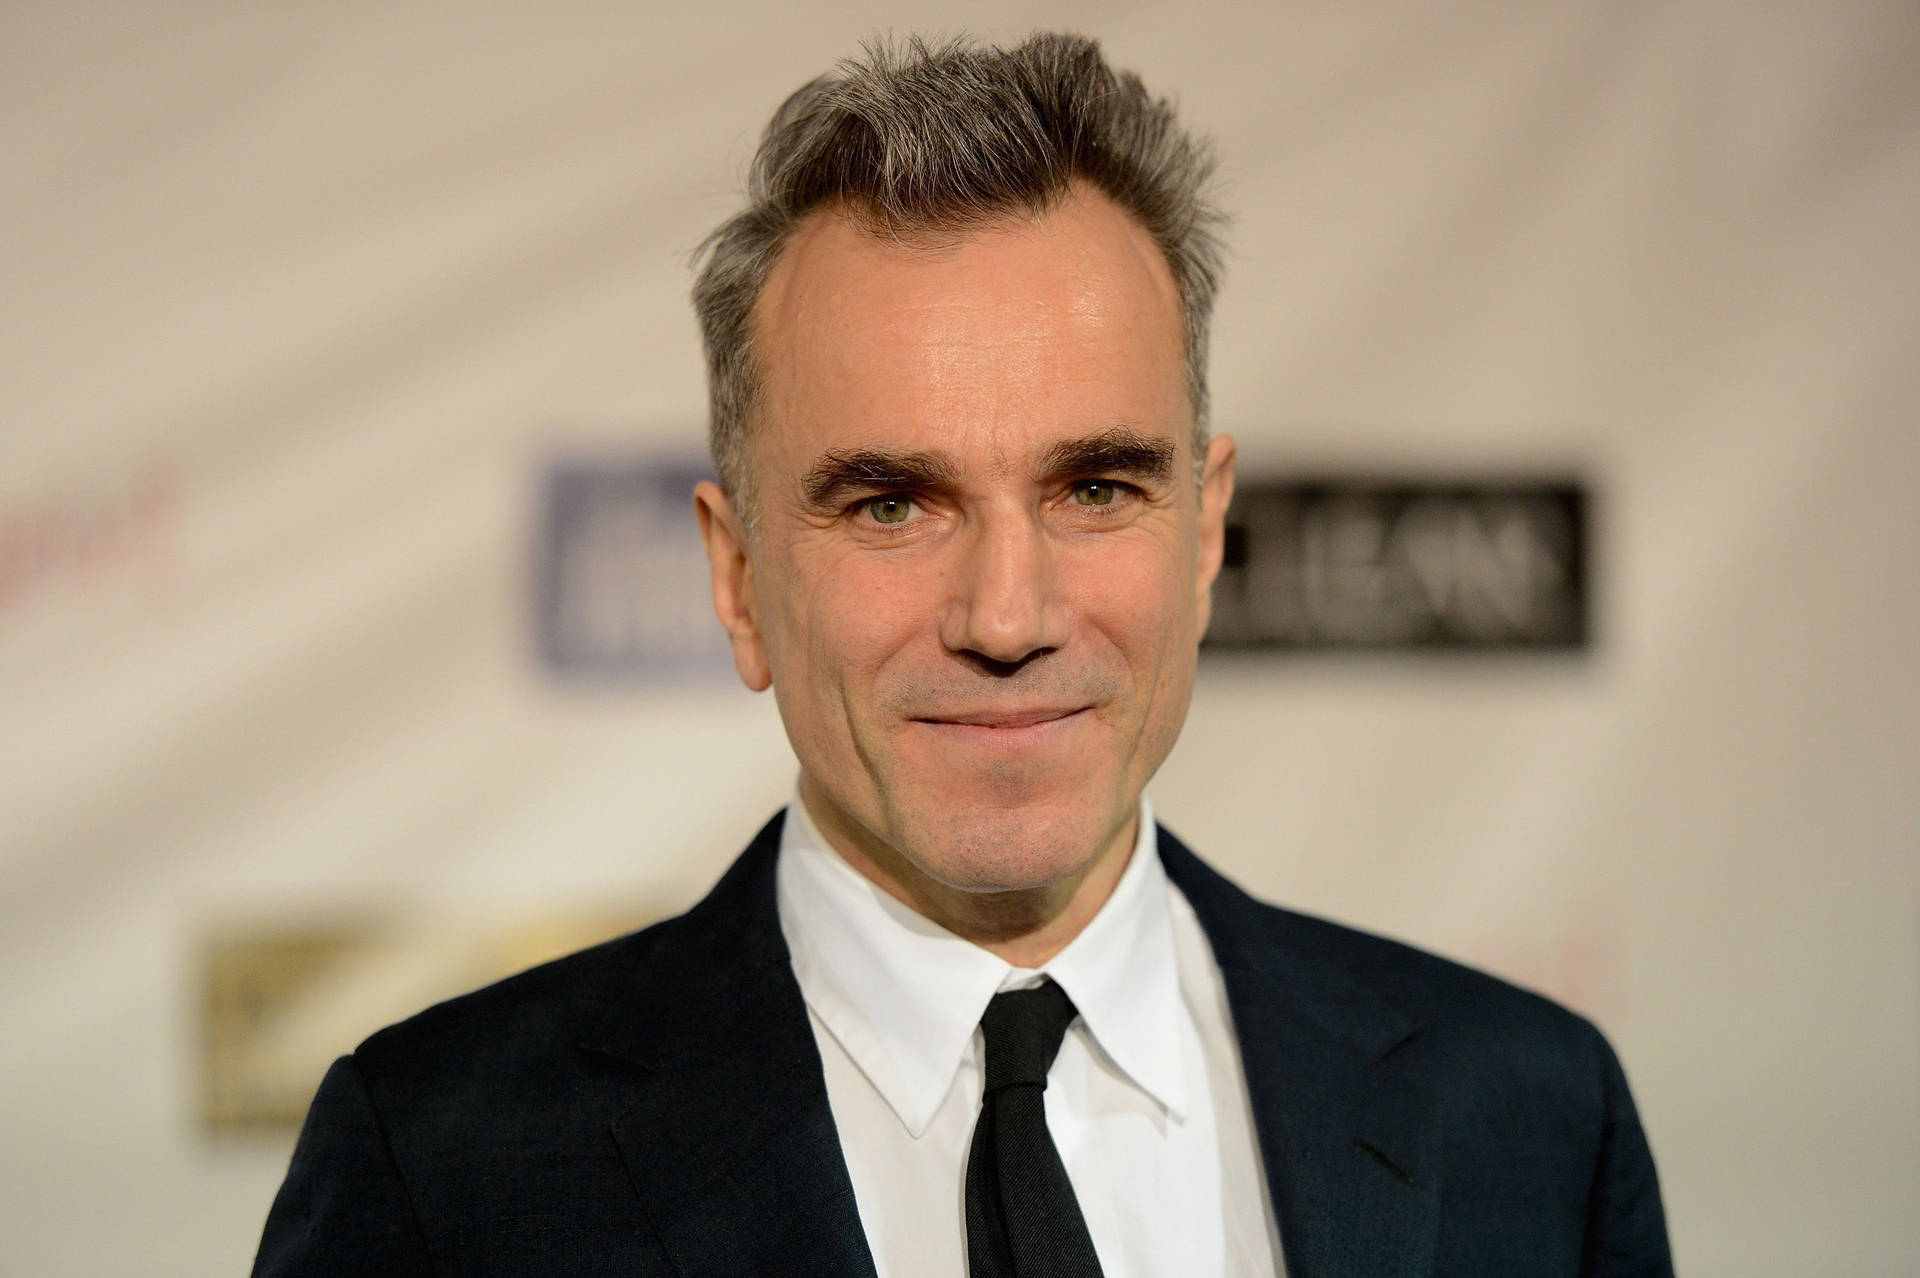 Caption: Daniel Day-Lewis in a James Bond style Wallpaper